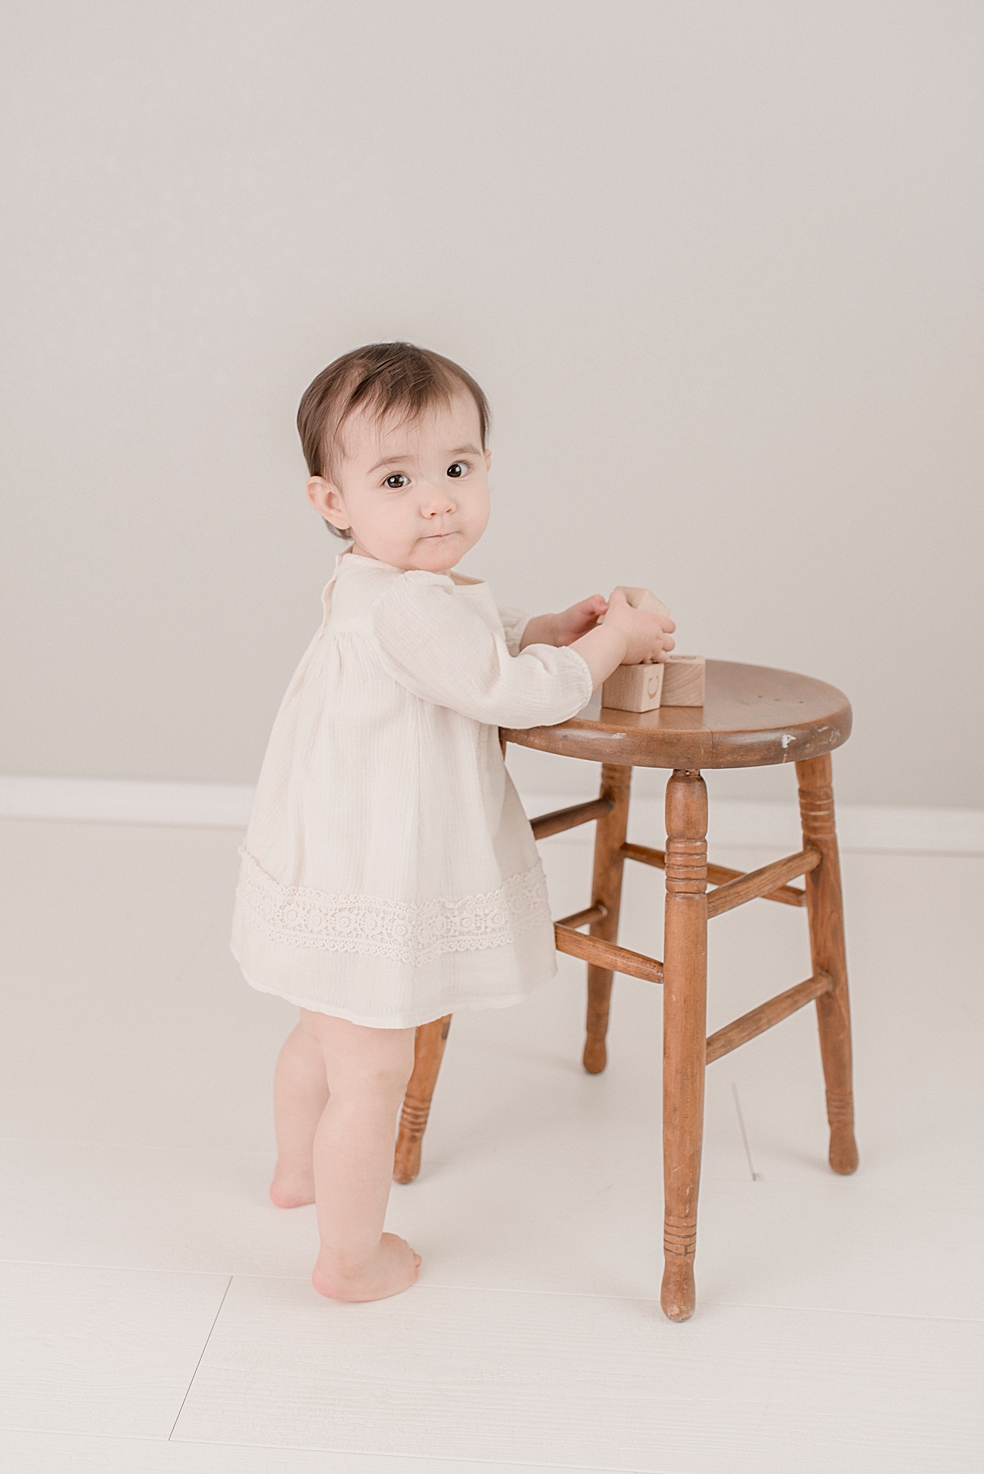 Baby girl playing with wooden blocks during her light and airy studio session | Photo by Jessica Lee Photography